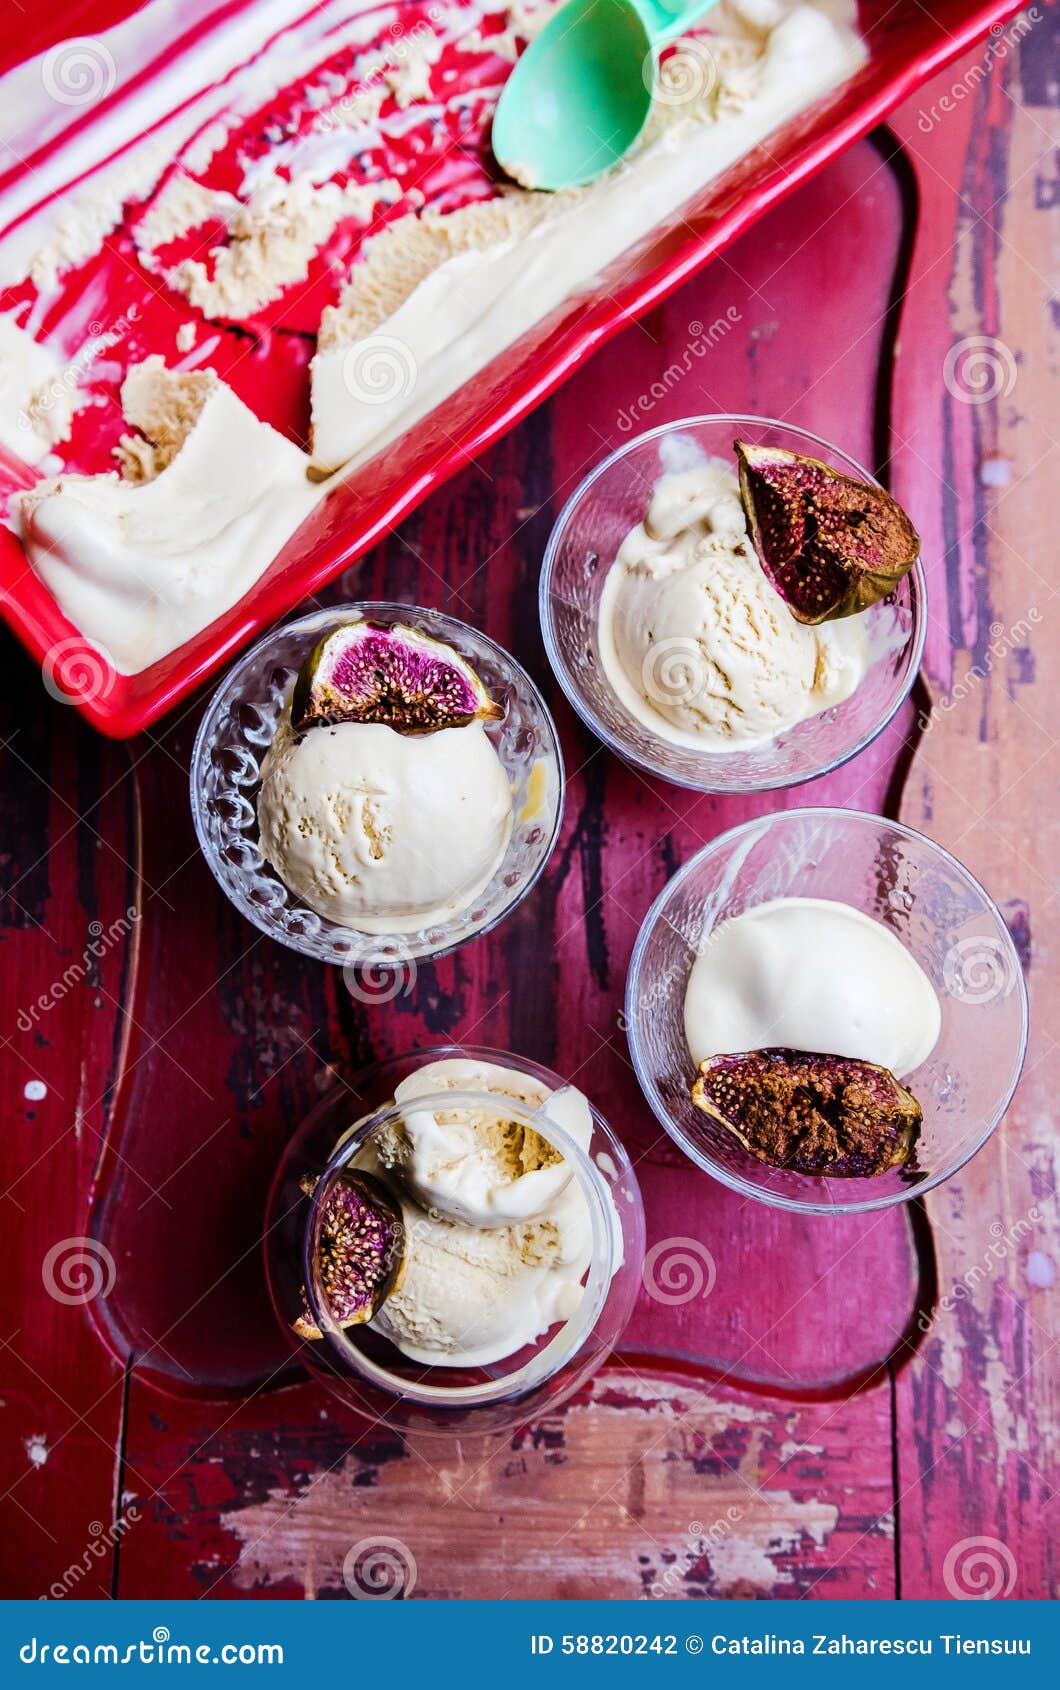 dulce de leche ice cream with baked figs